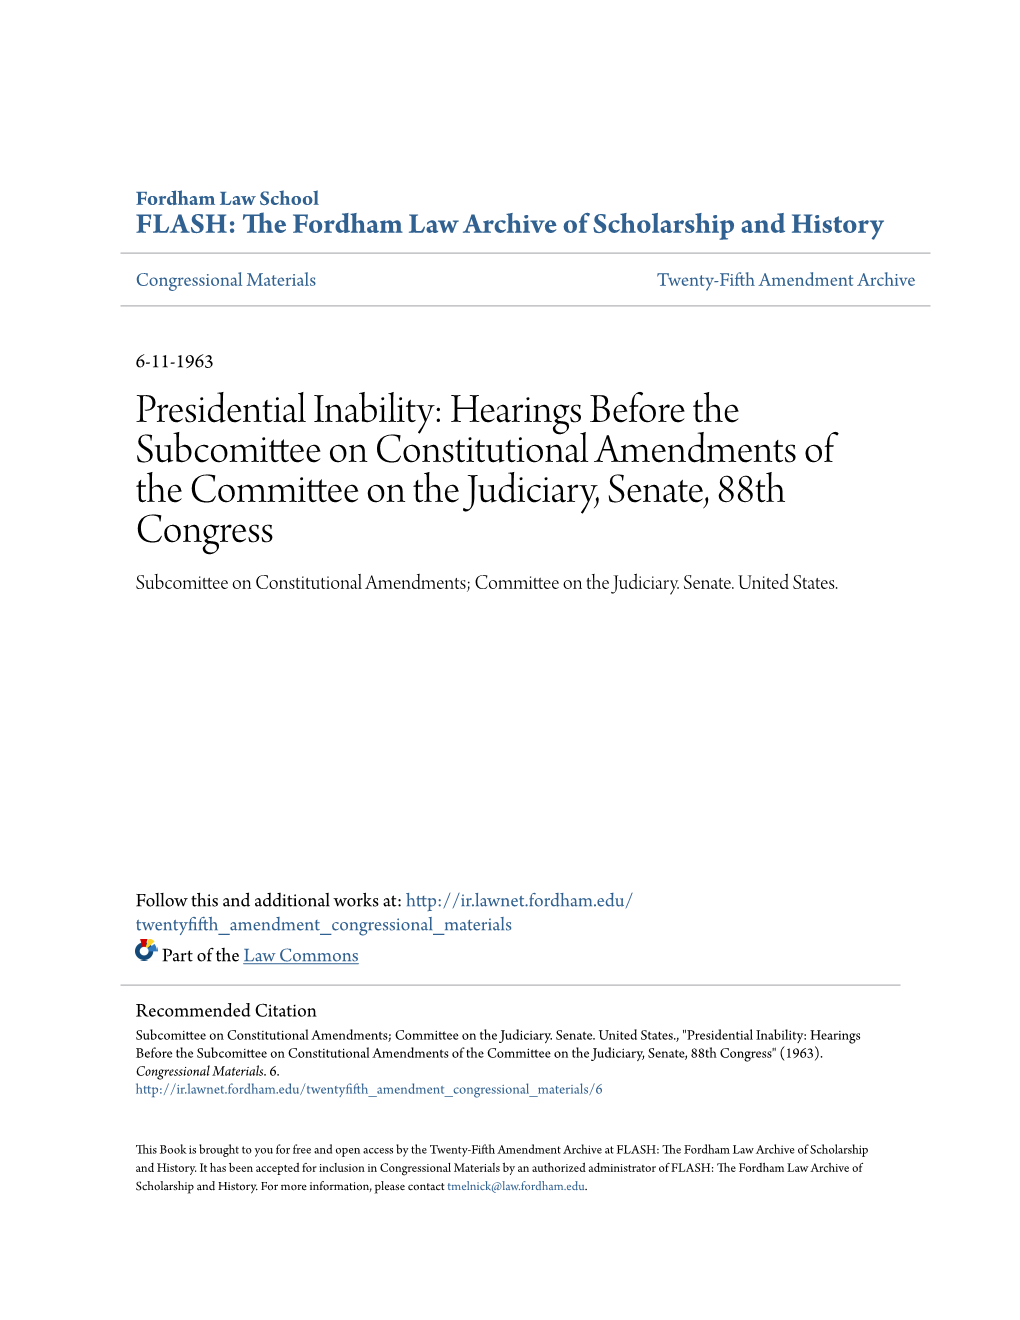 Presidential Inability: Hearings Before the Subcomittee On